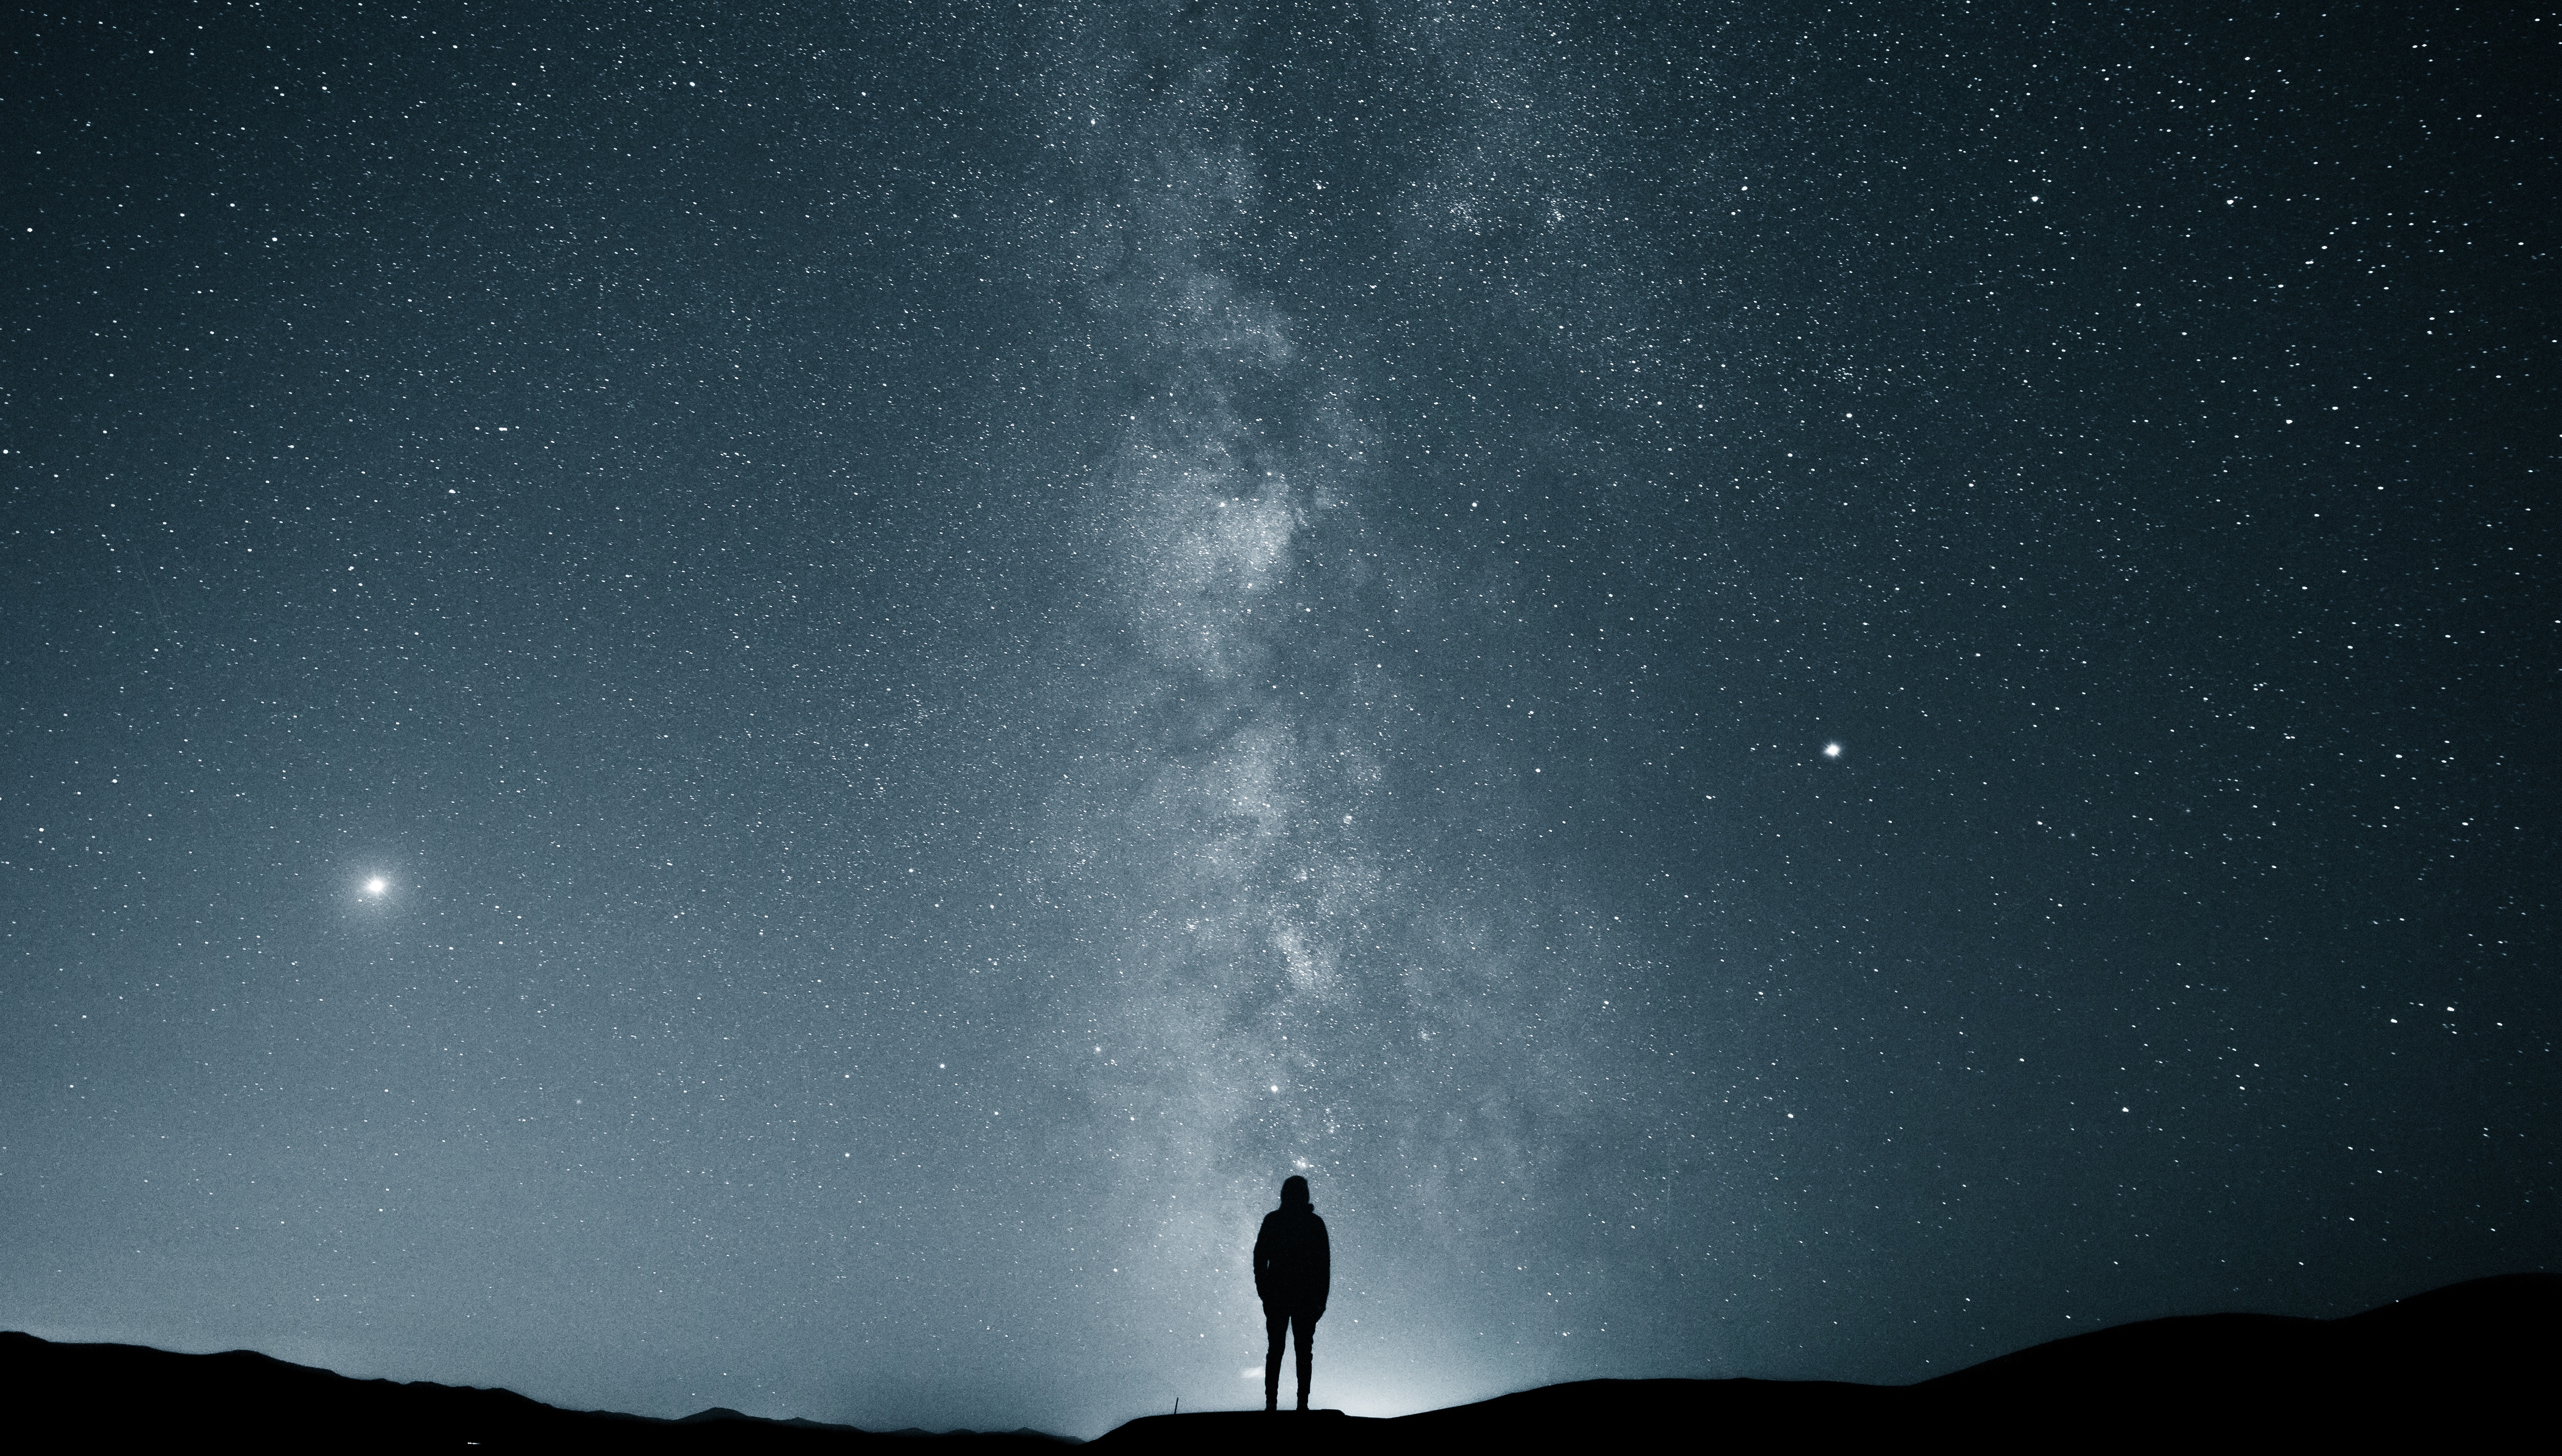 loneliness, privacy, dark, starry sky, shine, silhouette, seclusion, brilliance